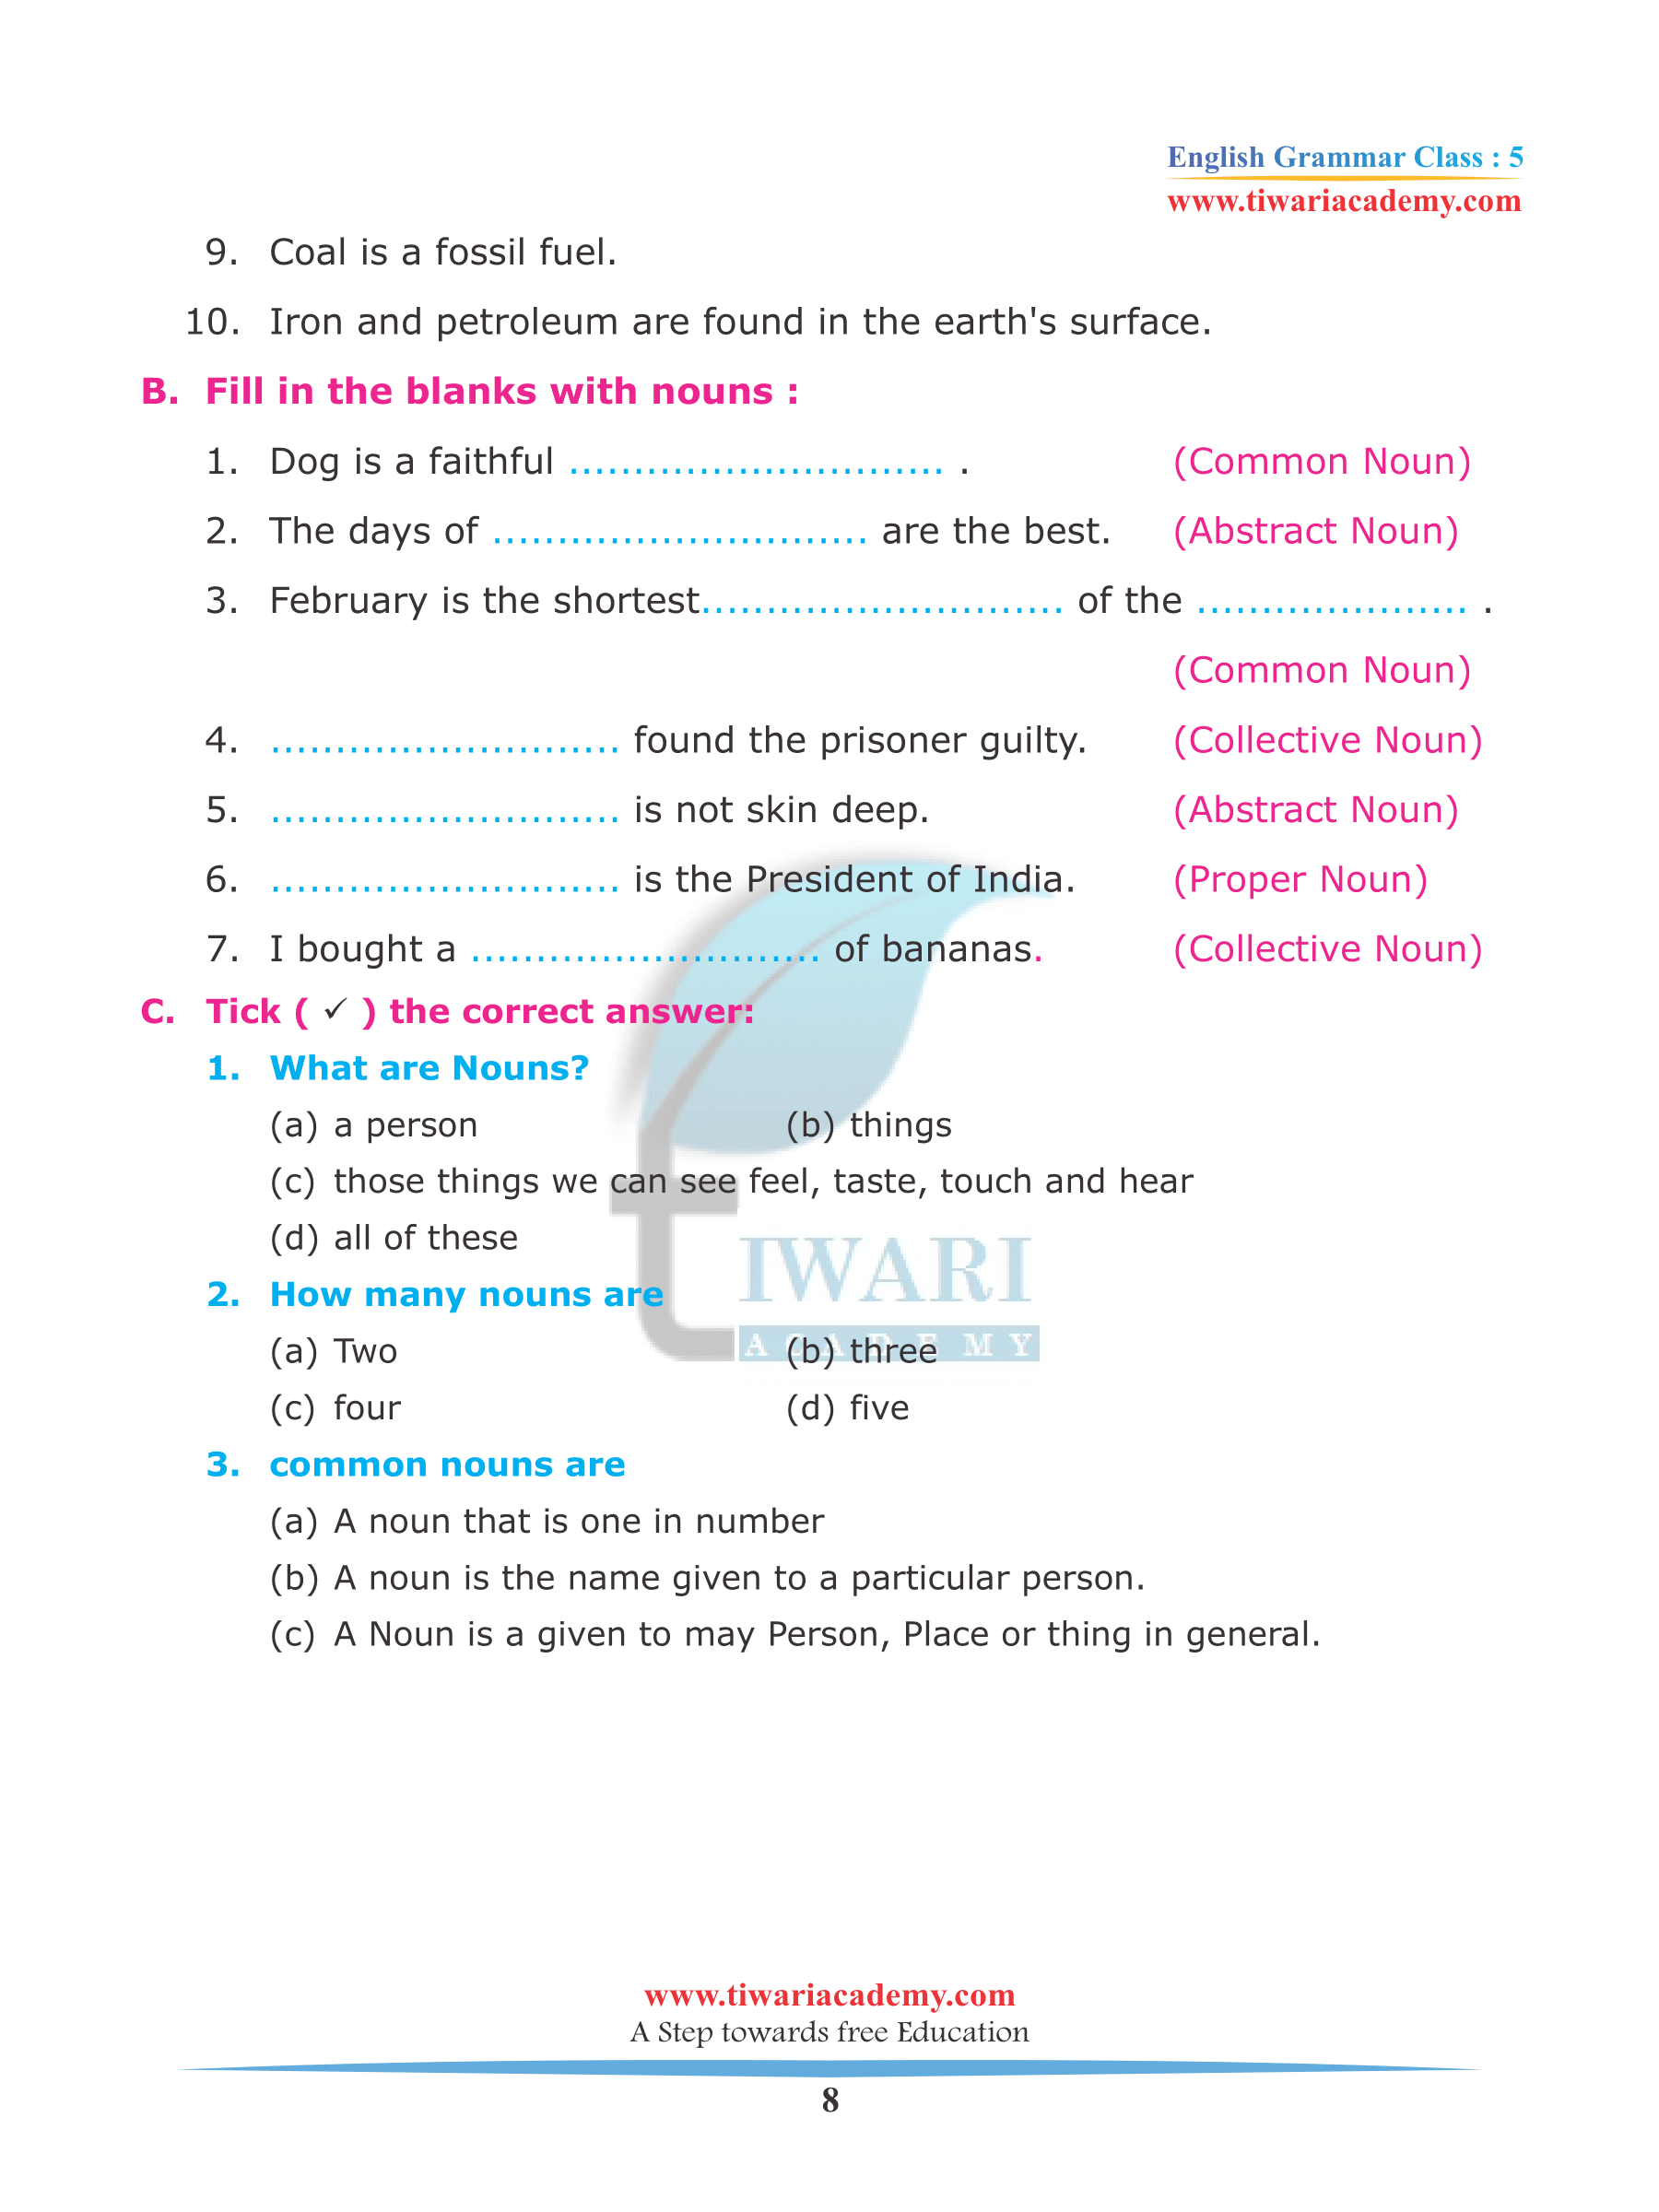 Class 5 English Grammar Chapter 2 The Noun and its Kinds assignemnts